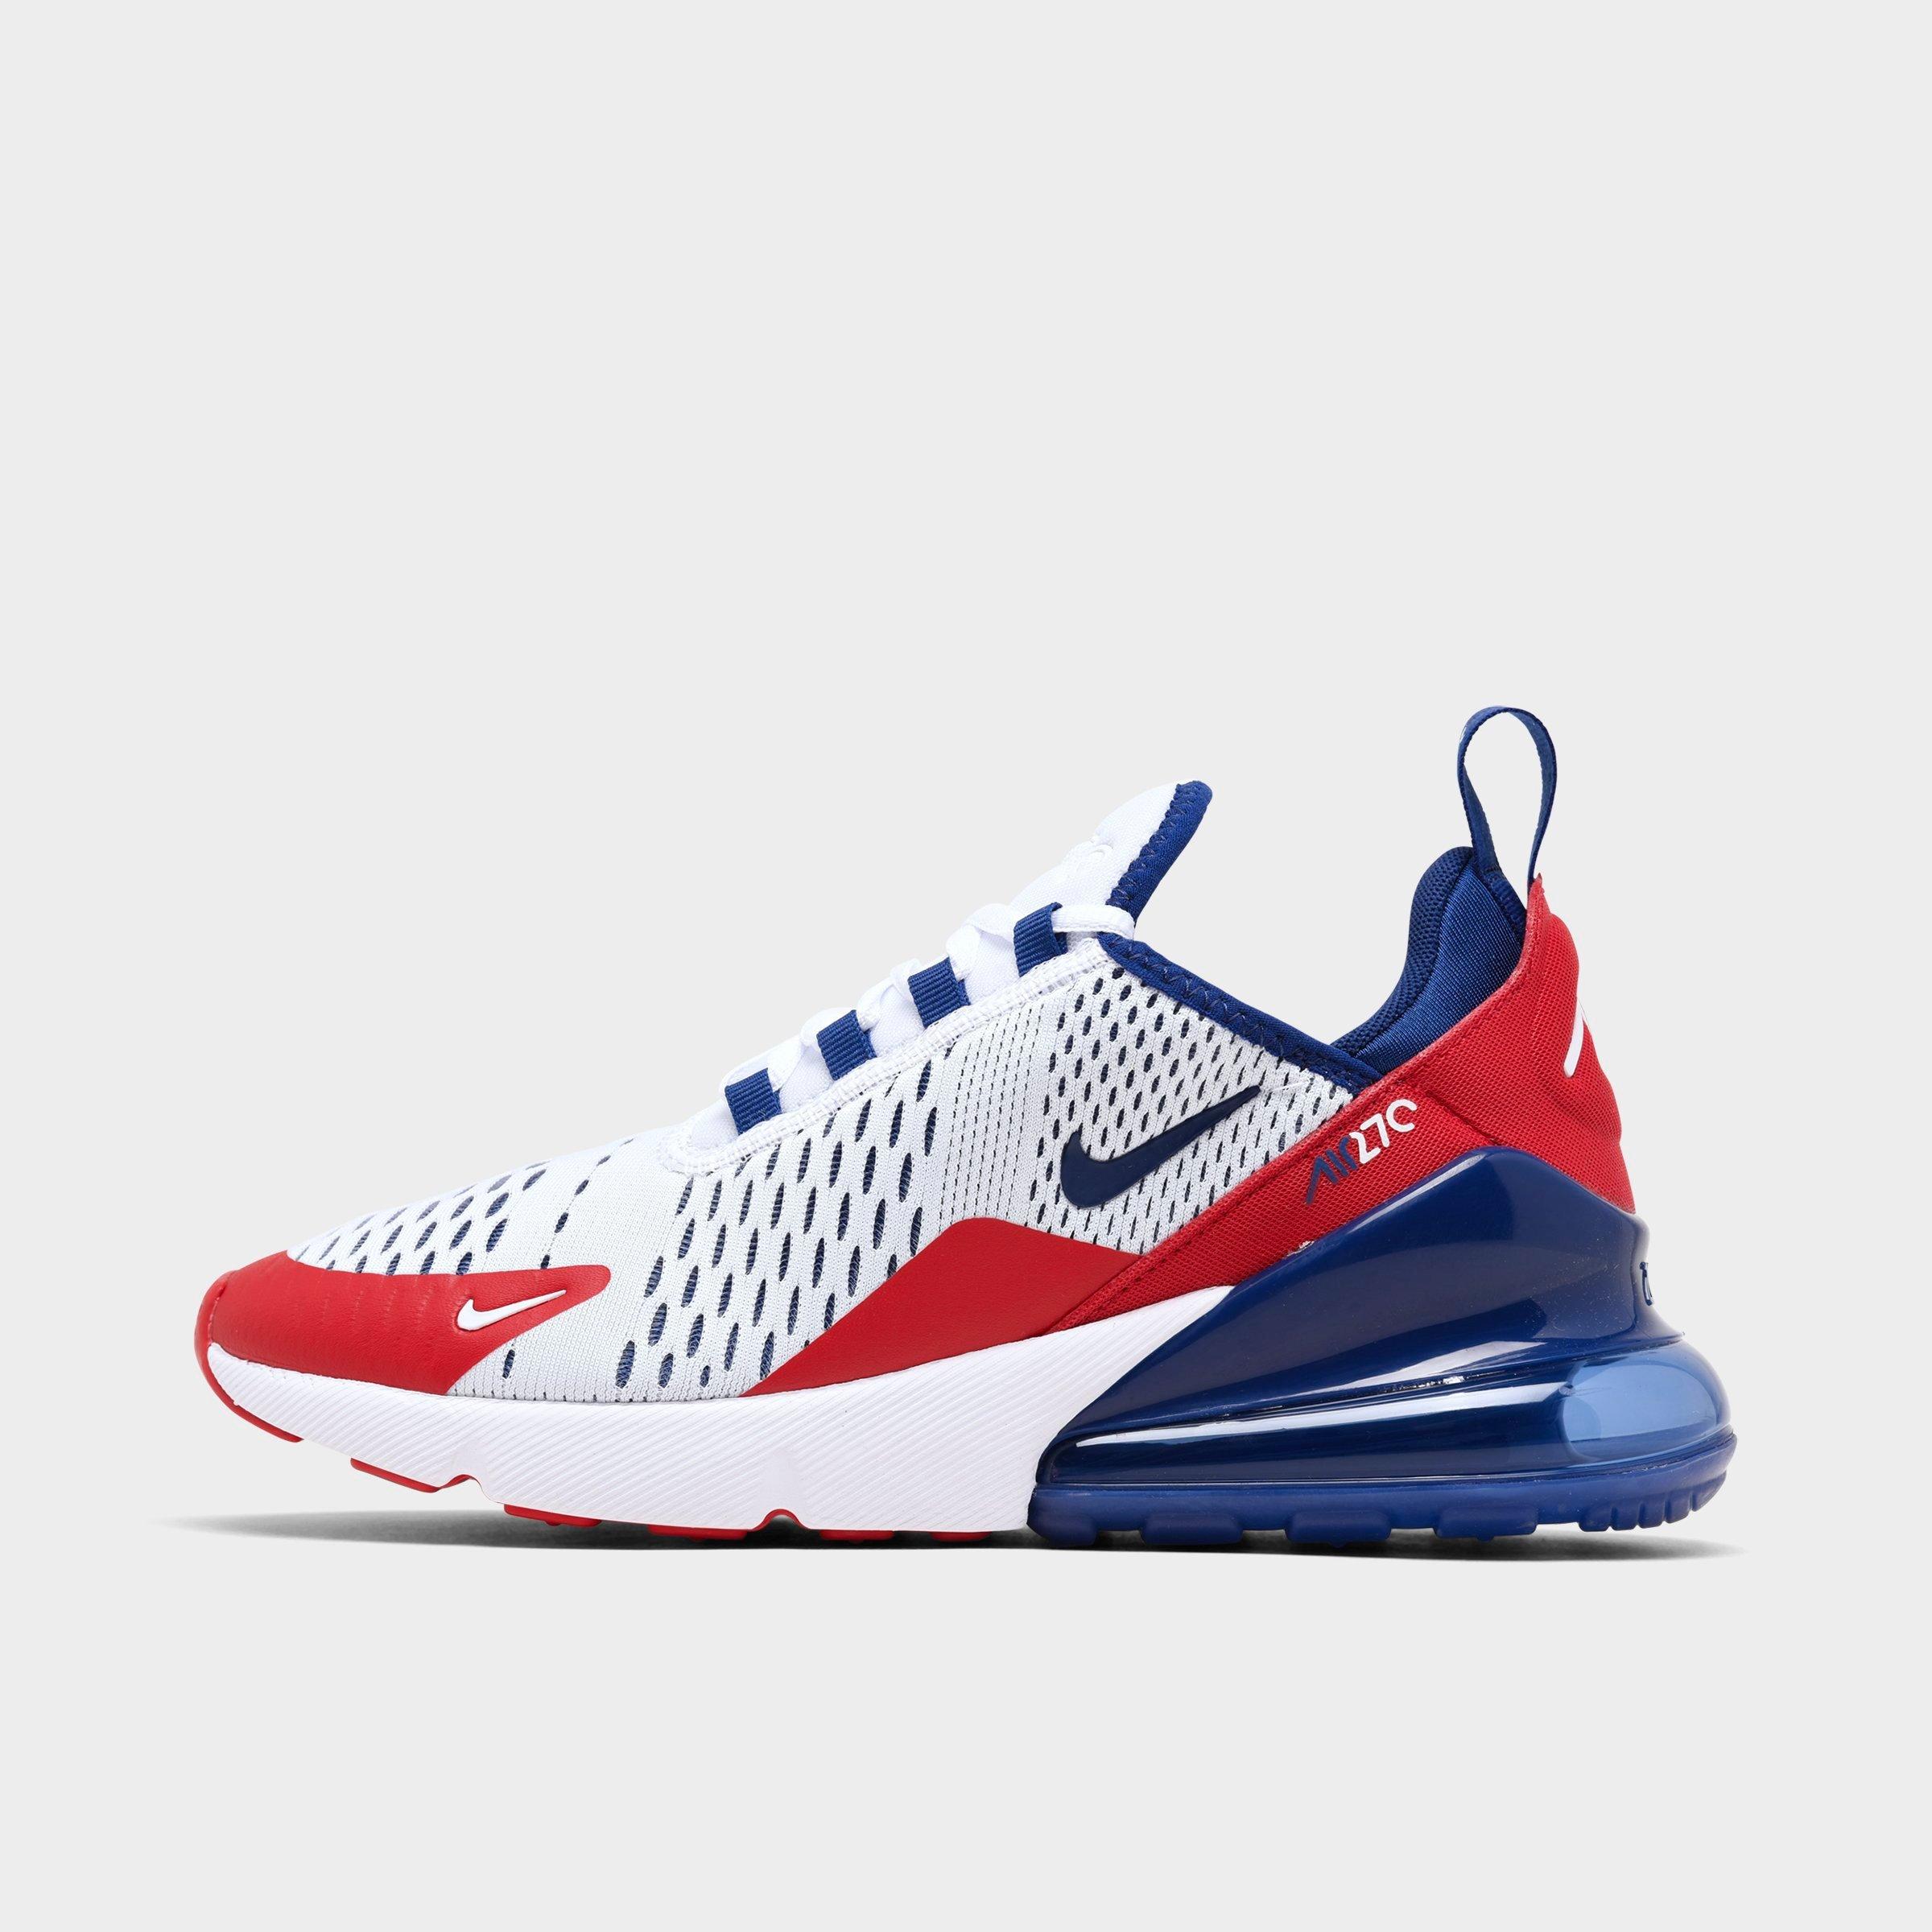 Big Kids Nike Air Max 270 Casual Shoes Finish Line